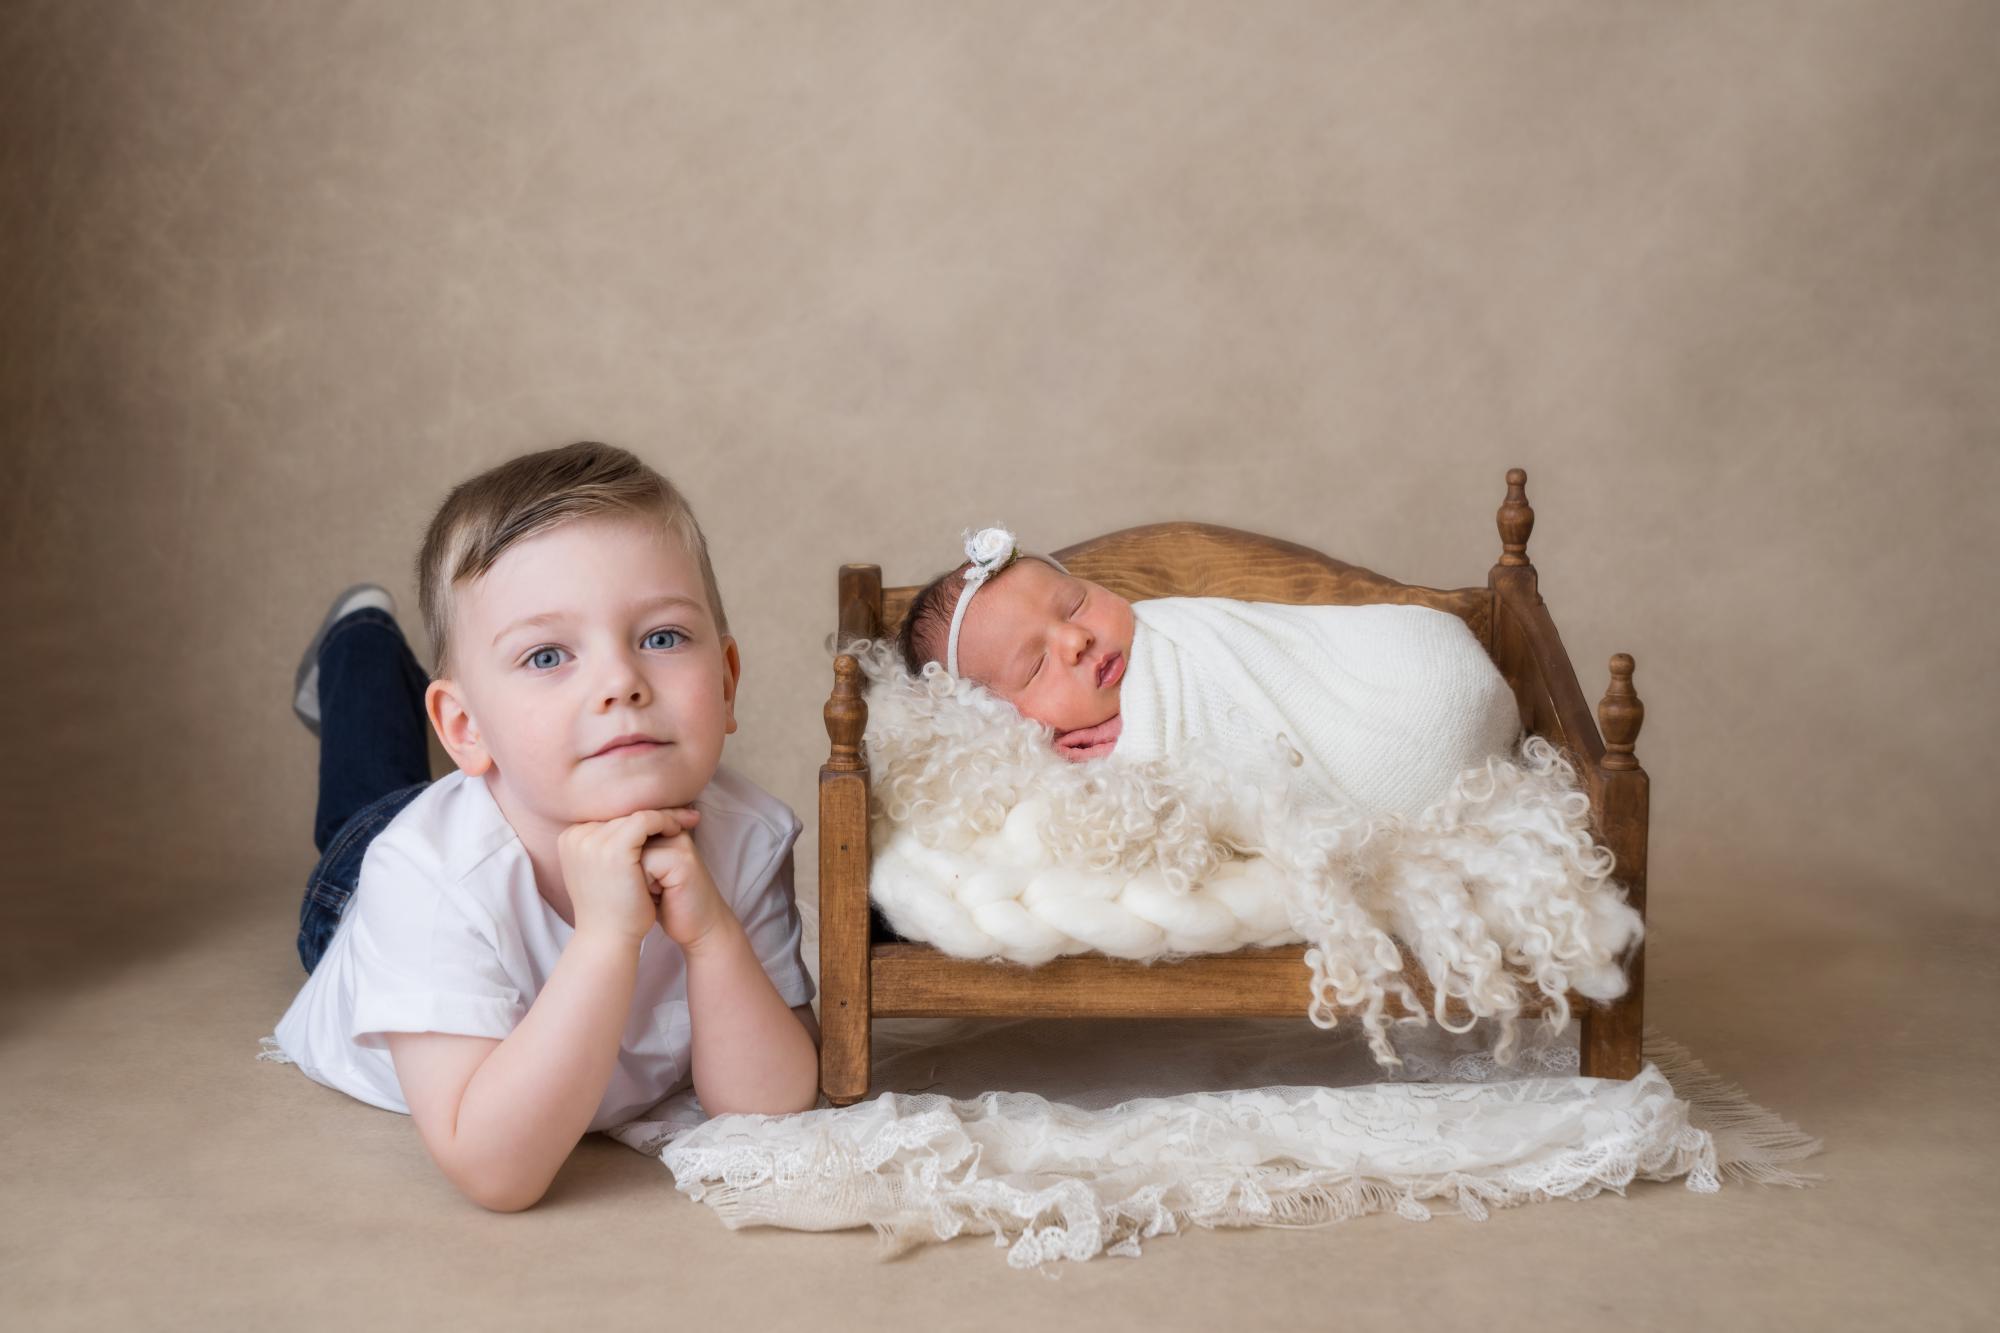 Newborn baby girl with brother sibling